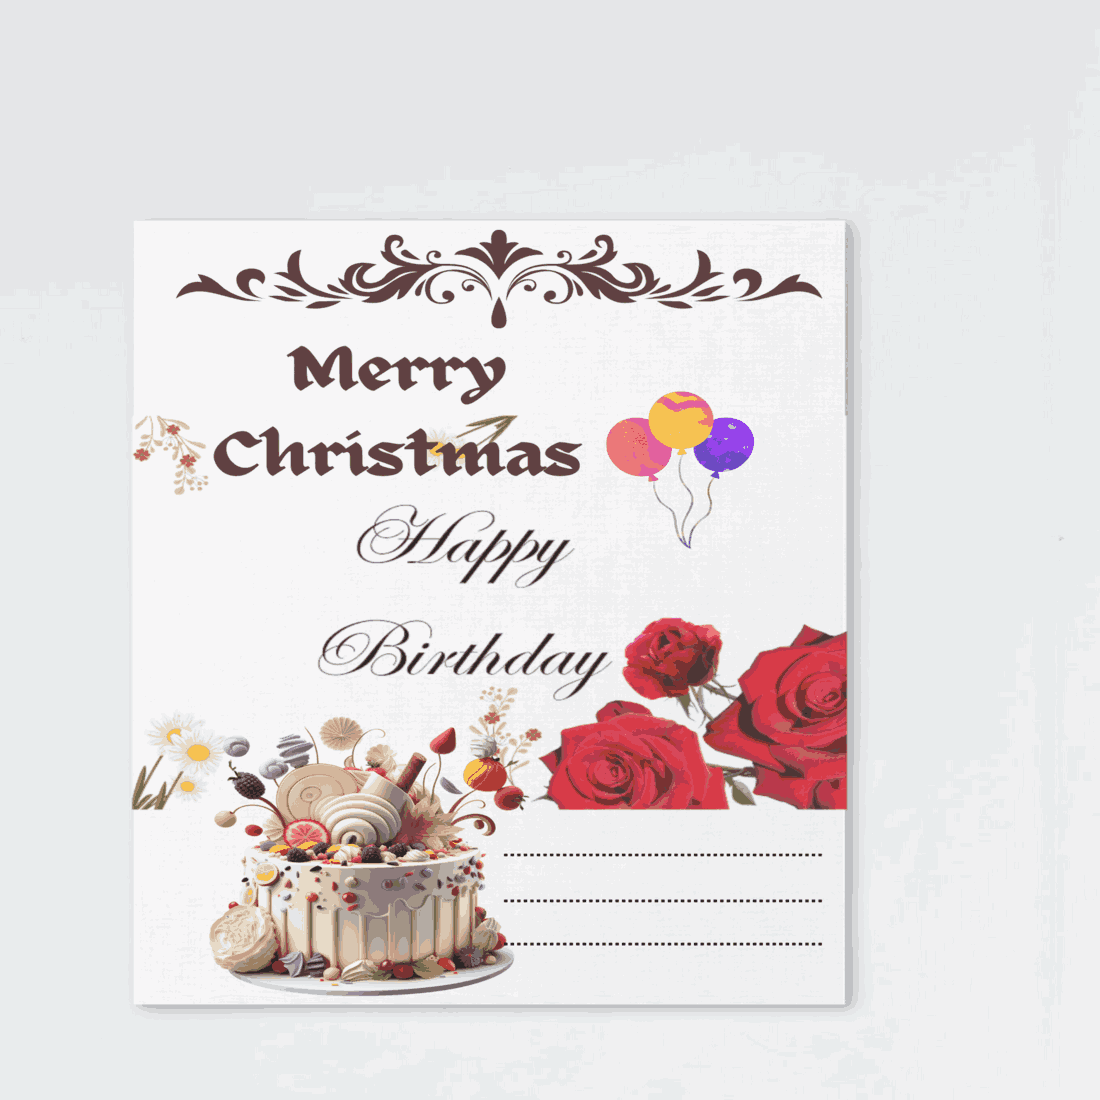 Beautiful design birthday card, merry Christmas preview image.